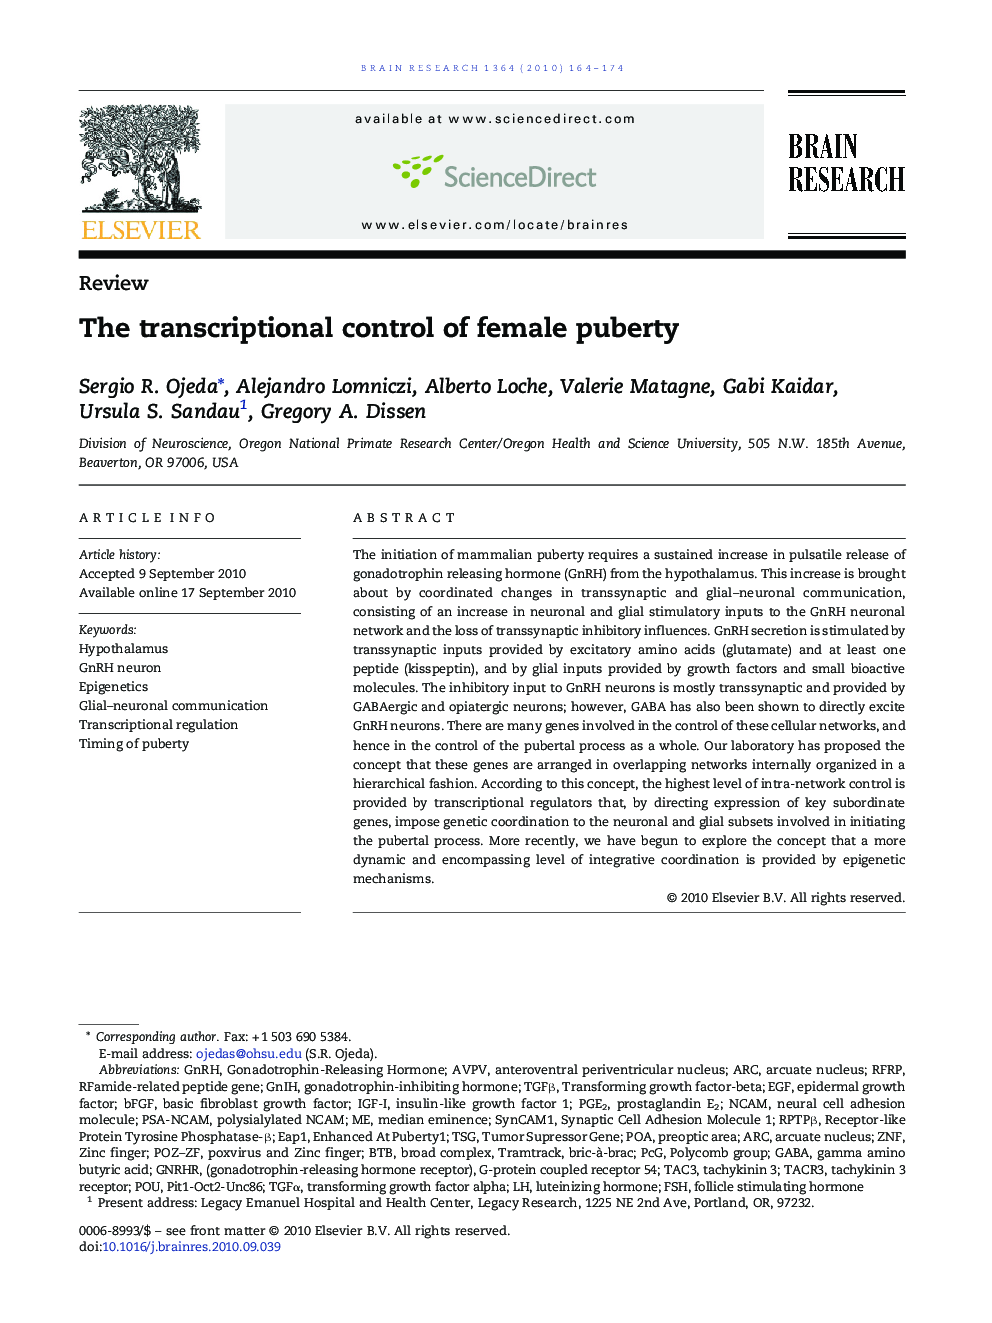 The transcriptional control of female puberty